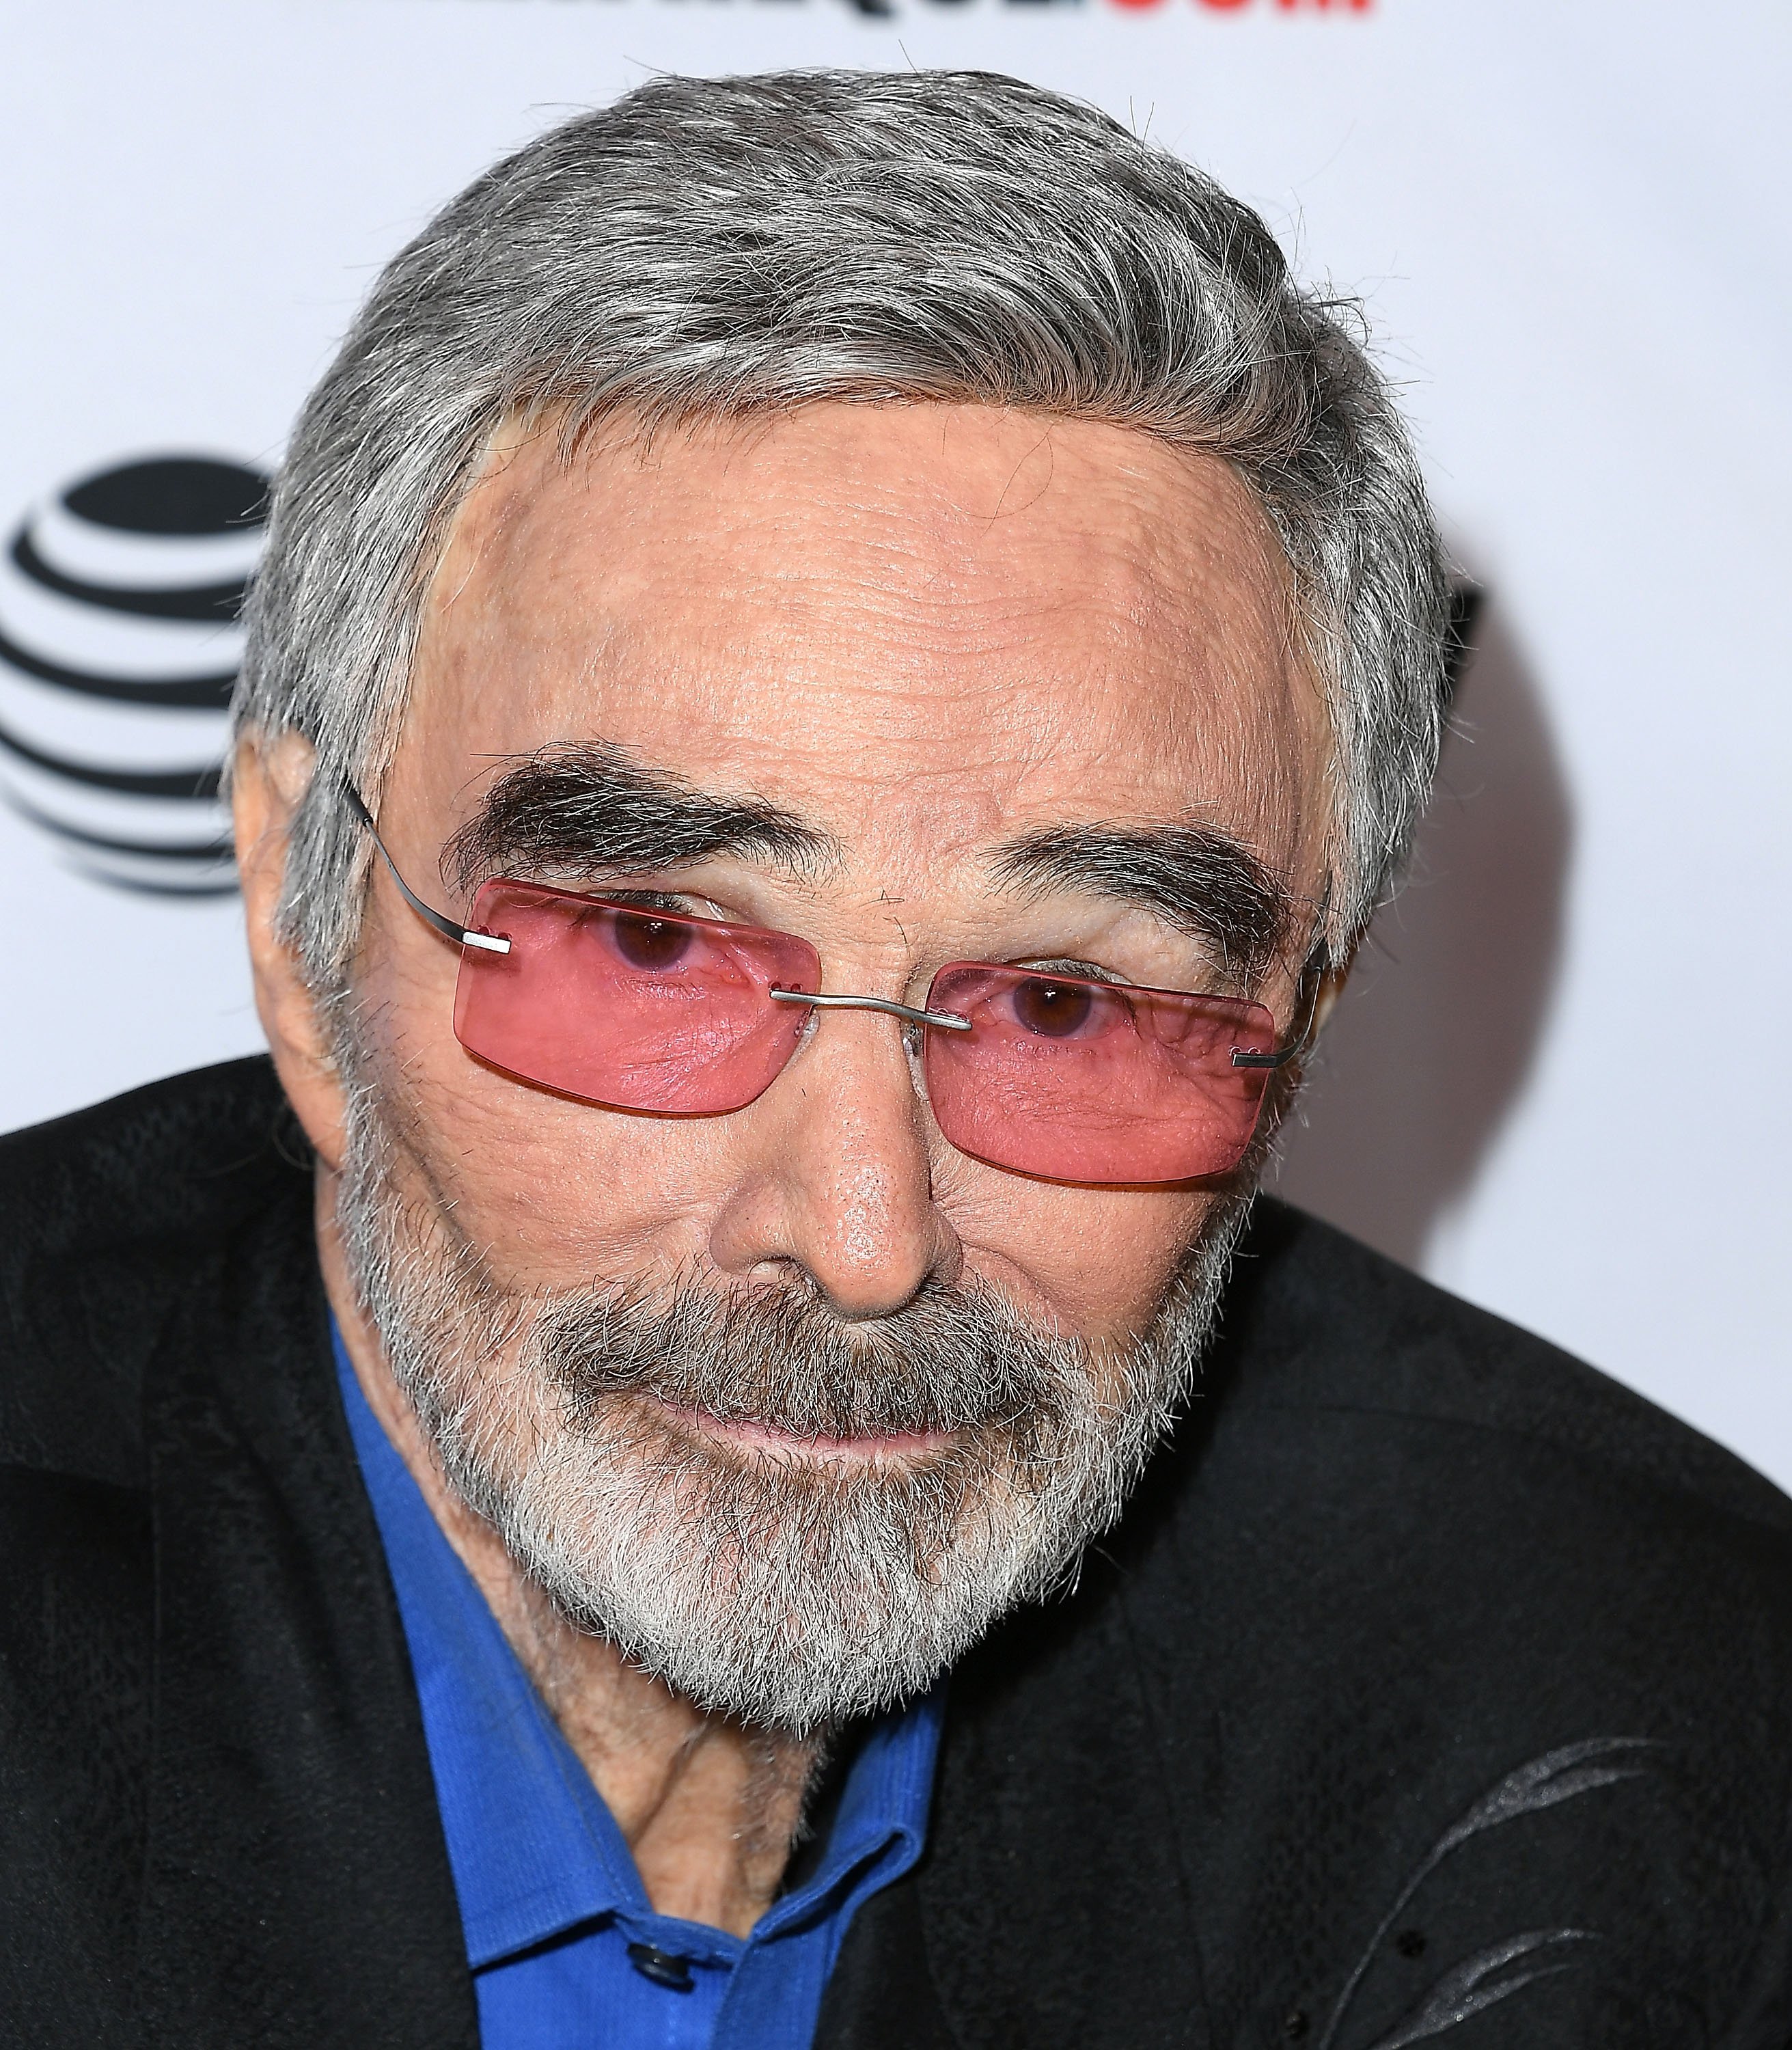 Burt Reynolds at the premiere of "The Last Movie Star" on March 22, 2018 | Source: Getty Images